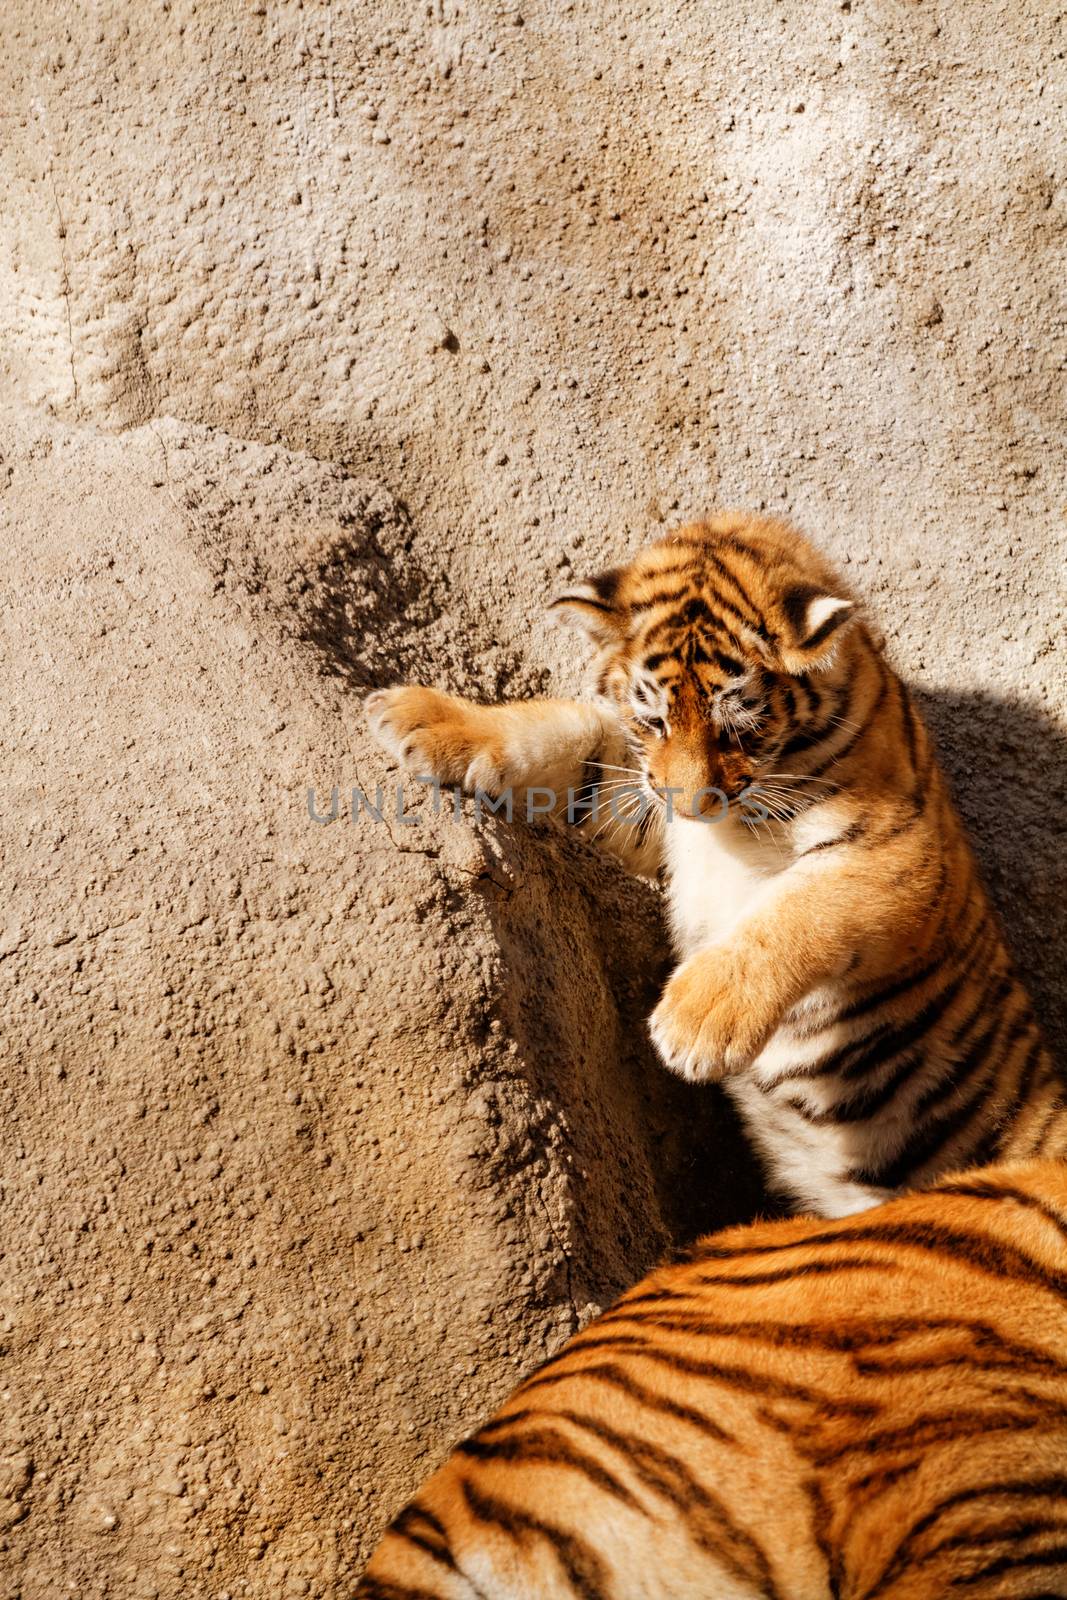 The tiger cub while climbing wall - sunny photo